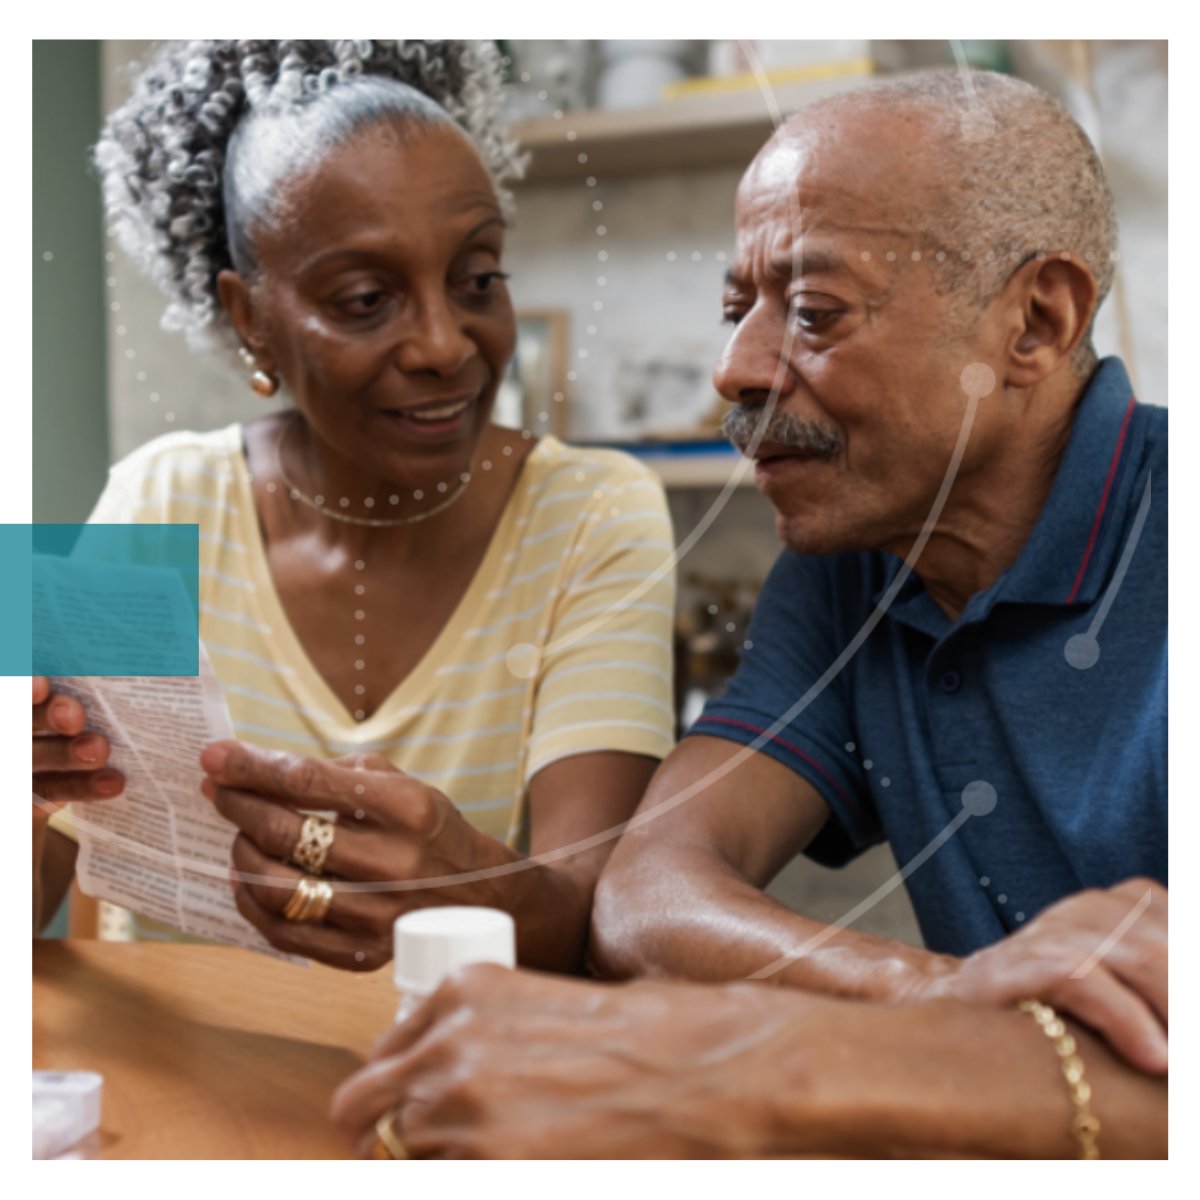 Read the #SDoH blog post by Diana Zuskov, MPH that summarizes three different success stories on how our customers have leveraged #socialdeterminantsofhealth data for good by turning data into insights and action ➡️ splr.io/6015gUx0R.